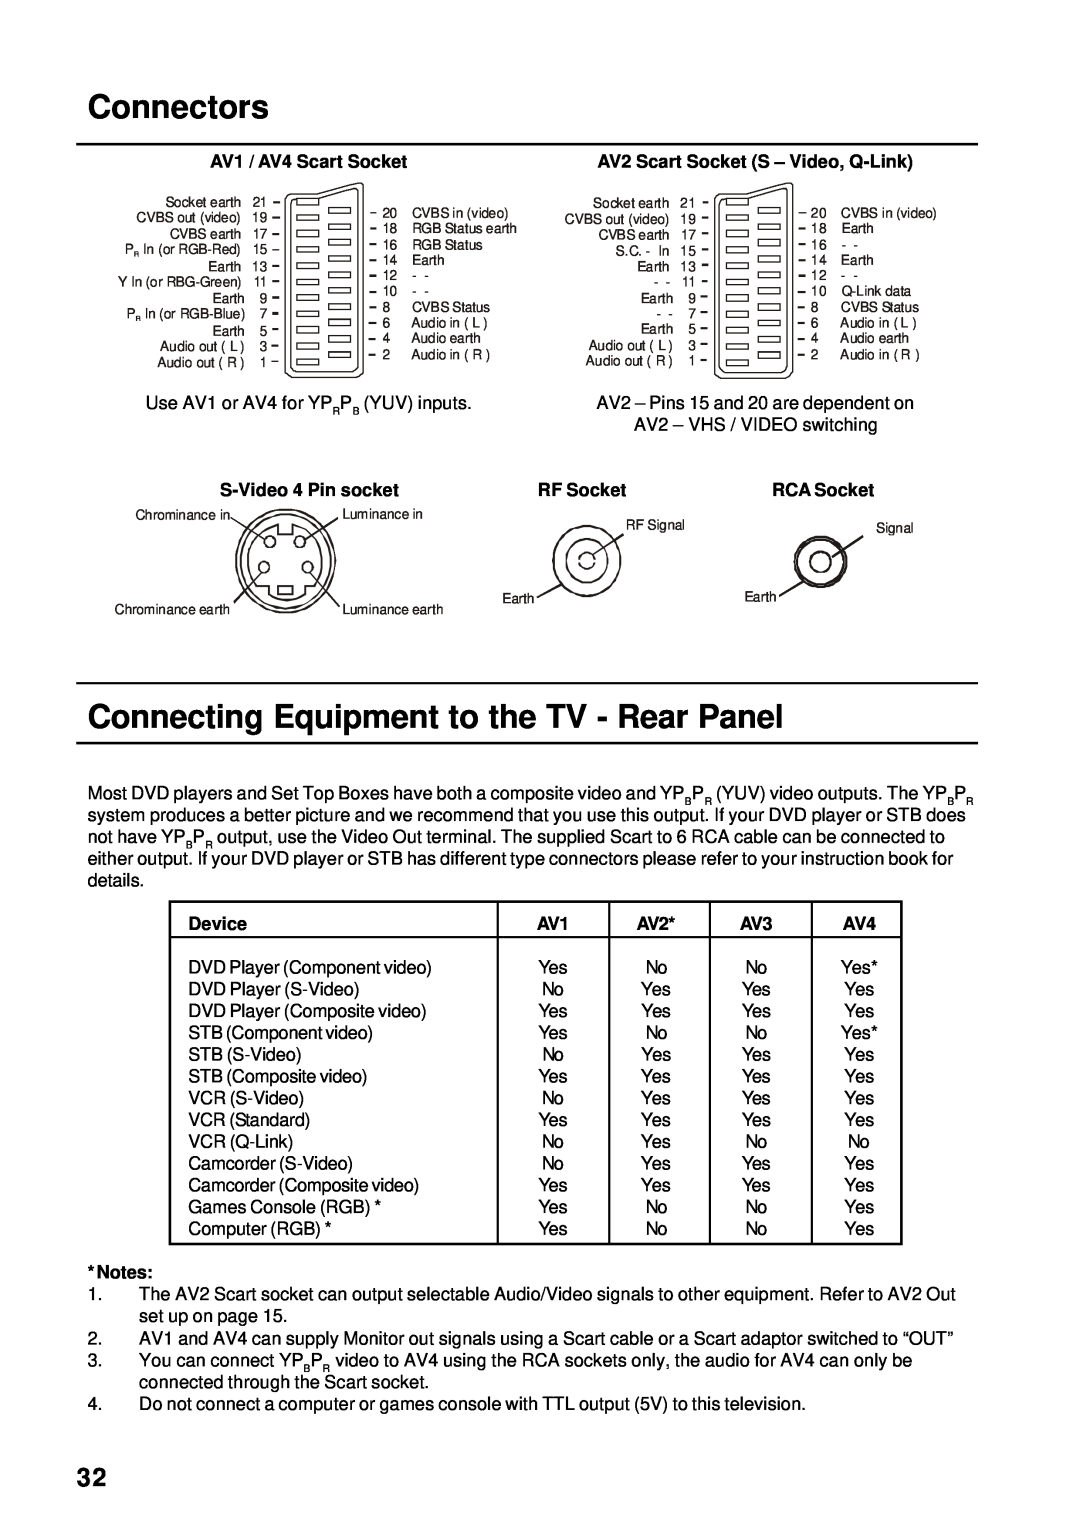 Panasonic TX-86PW155A Connectors, Connecting Equipment to the TV - Rear Panel, Use AV1 or AV4 for YP RP B YUV inputs 